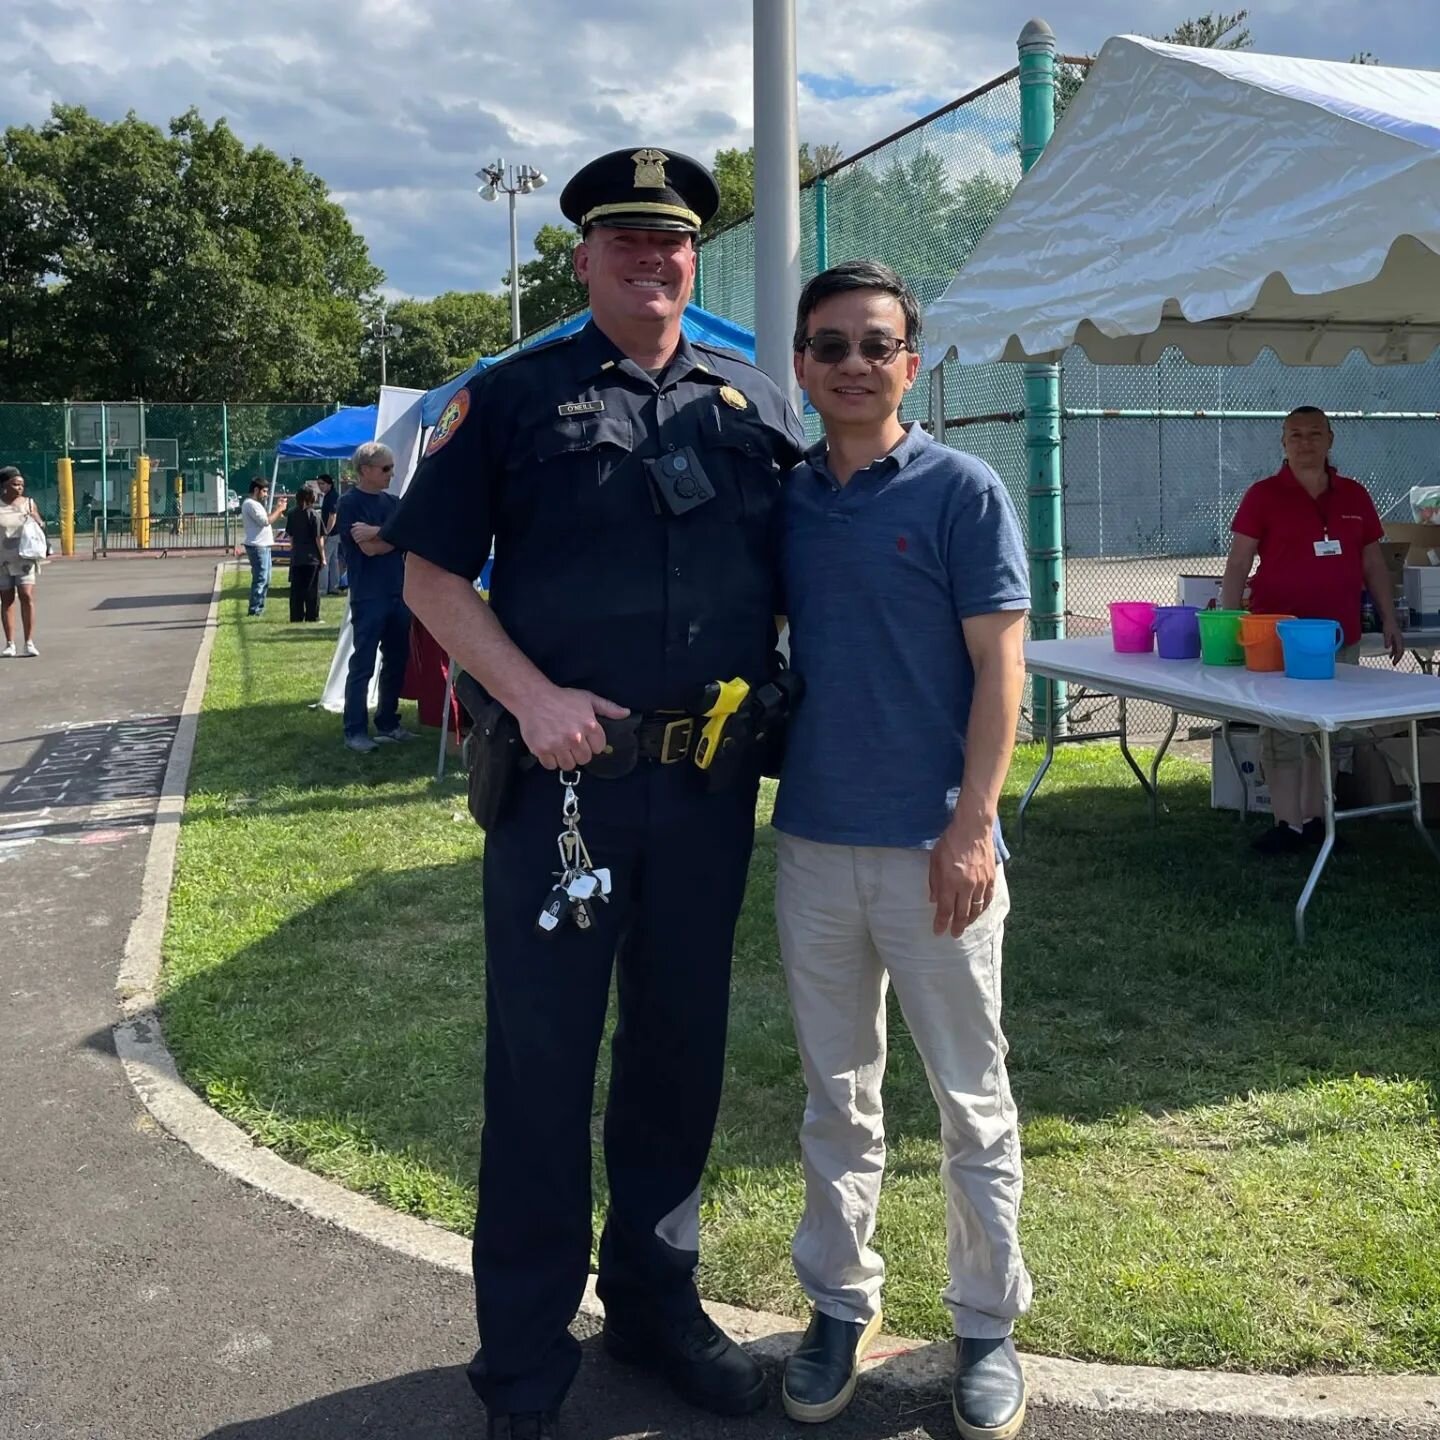 Had a blast joining my amazing interns at National Night Out in Manhasset and Port Washington! 🇺🇸 

It was a fantastic evening connecting with our community, supporting local law enforcement, and promoting safer neighborhoods. Nassau County deserve